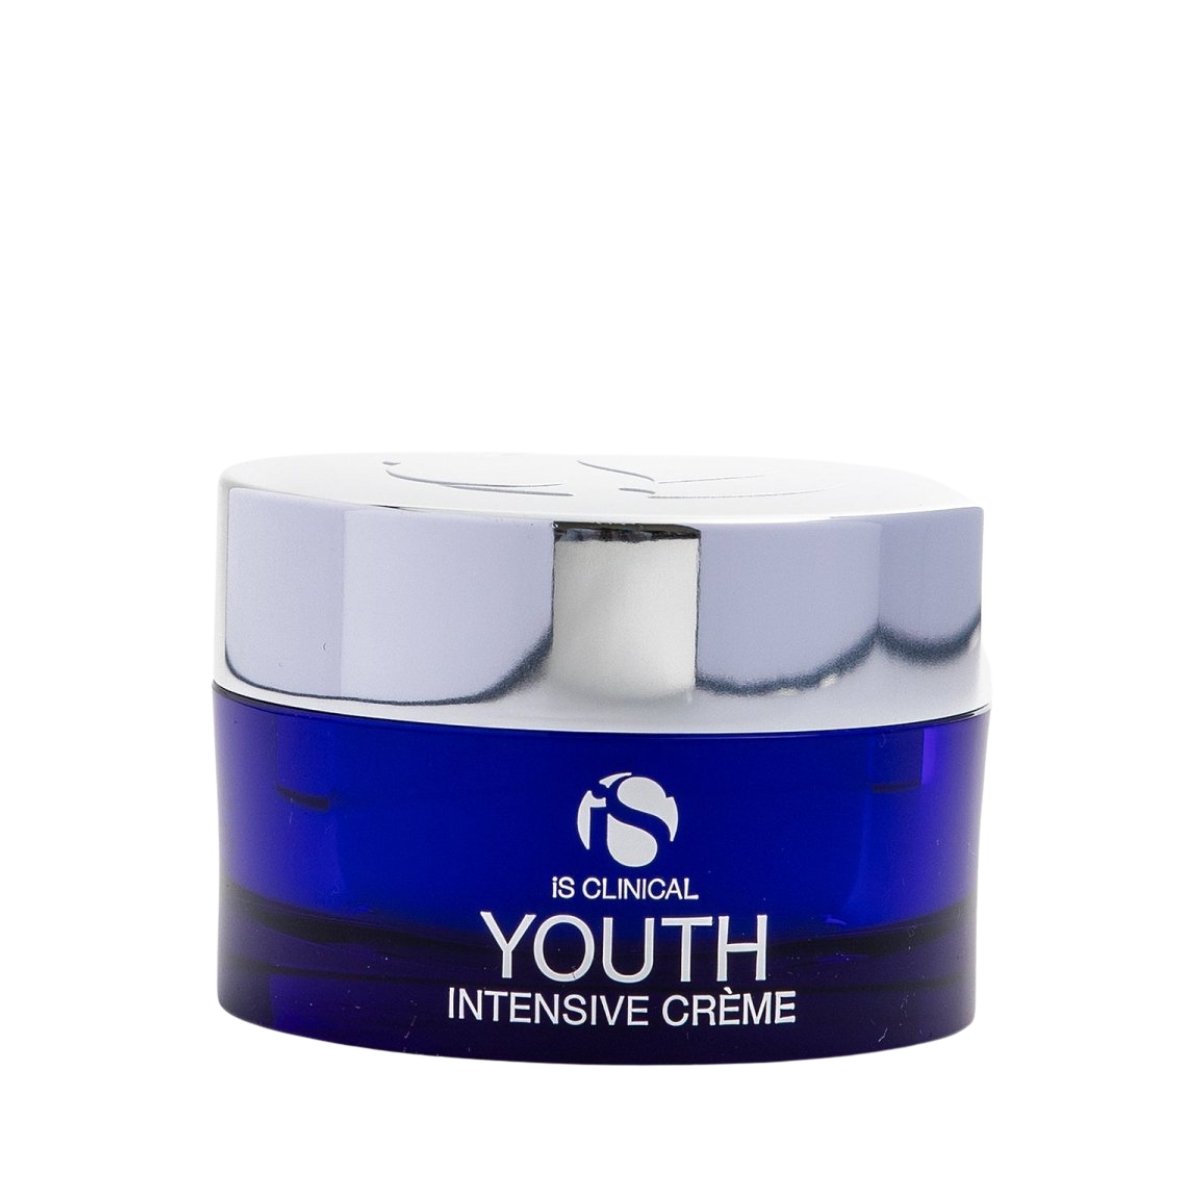 iS Clinical Youth Intensive Crème - SkincareEssentials